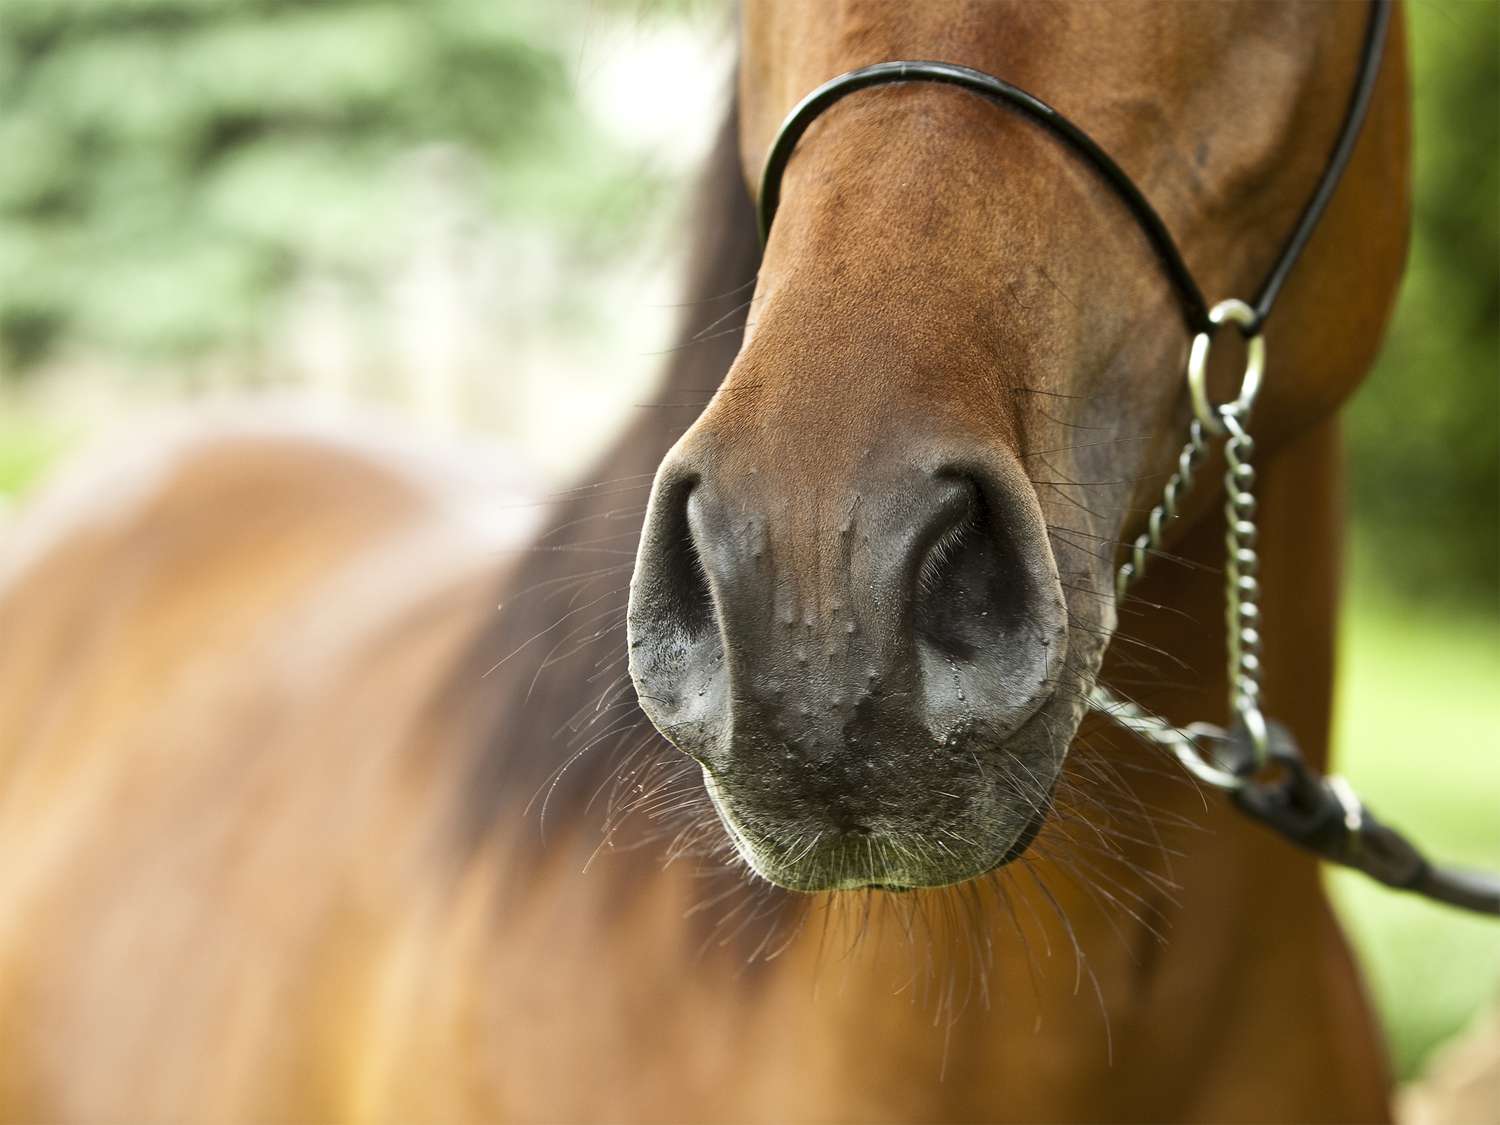 bumps on horse's nose